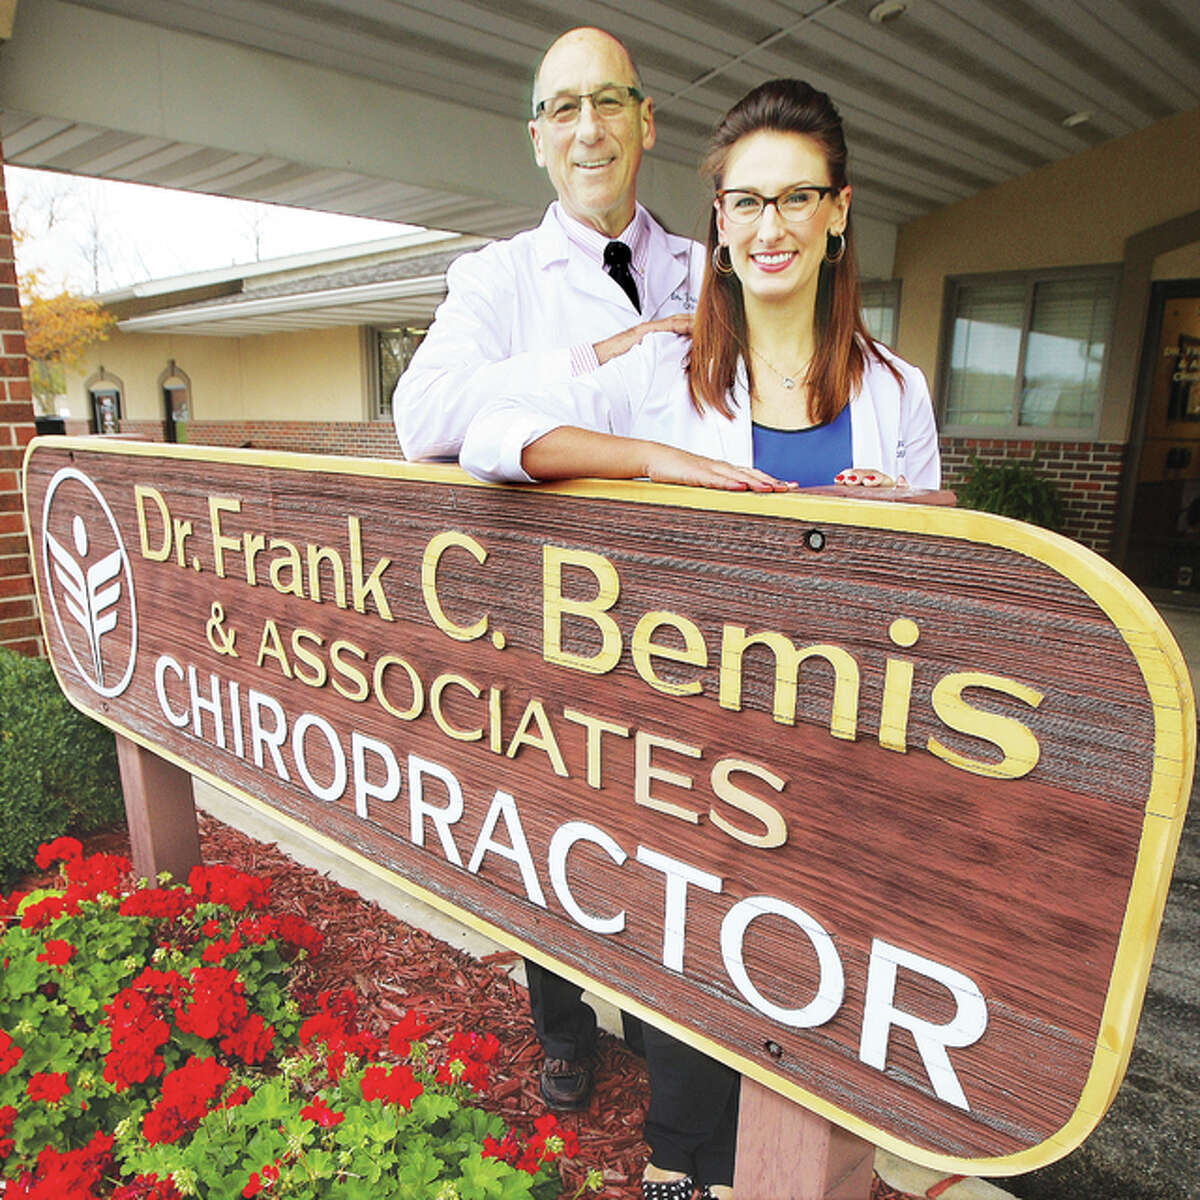 Dr. Frank C. Bemis and his daughter and youngest of three children, Dr. Kristina E. Bemis Tupman, stand outside their offices in 2015 when Bemis Tupman joined his practice. The practice shortly thereafter became Bemis Tupman Chiropractic as her husband, Dr. Stephen P. Tupman, and she purchased her father's practice in 2019.